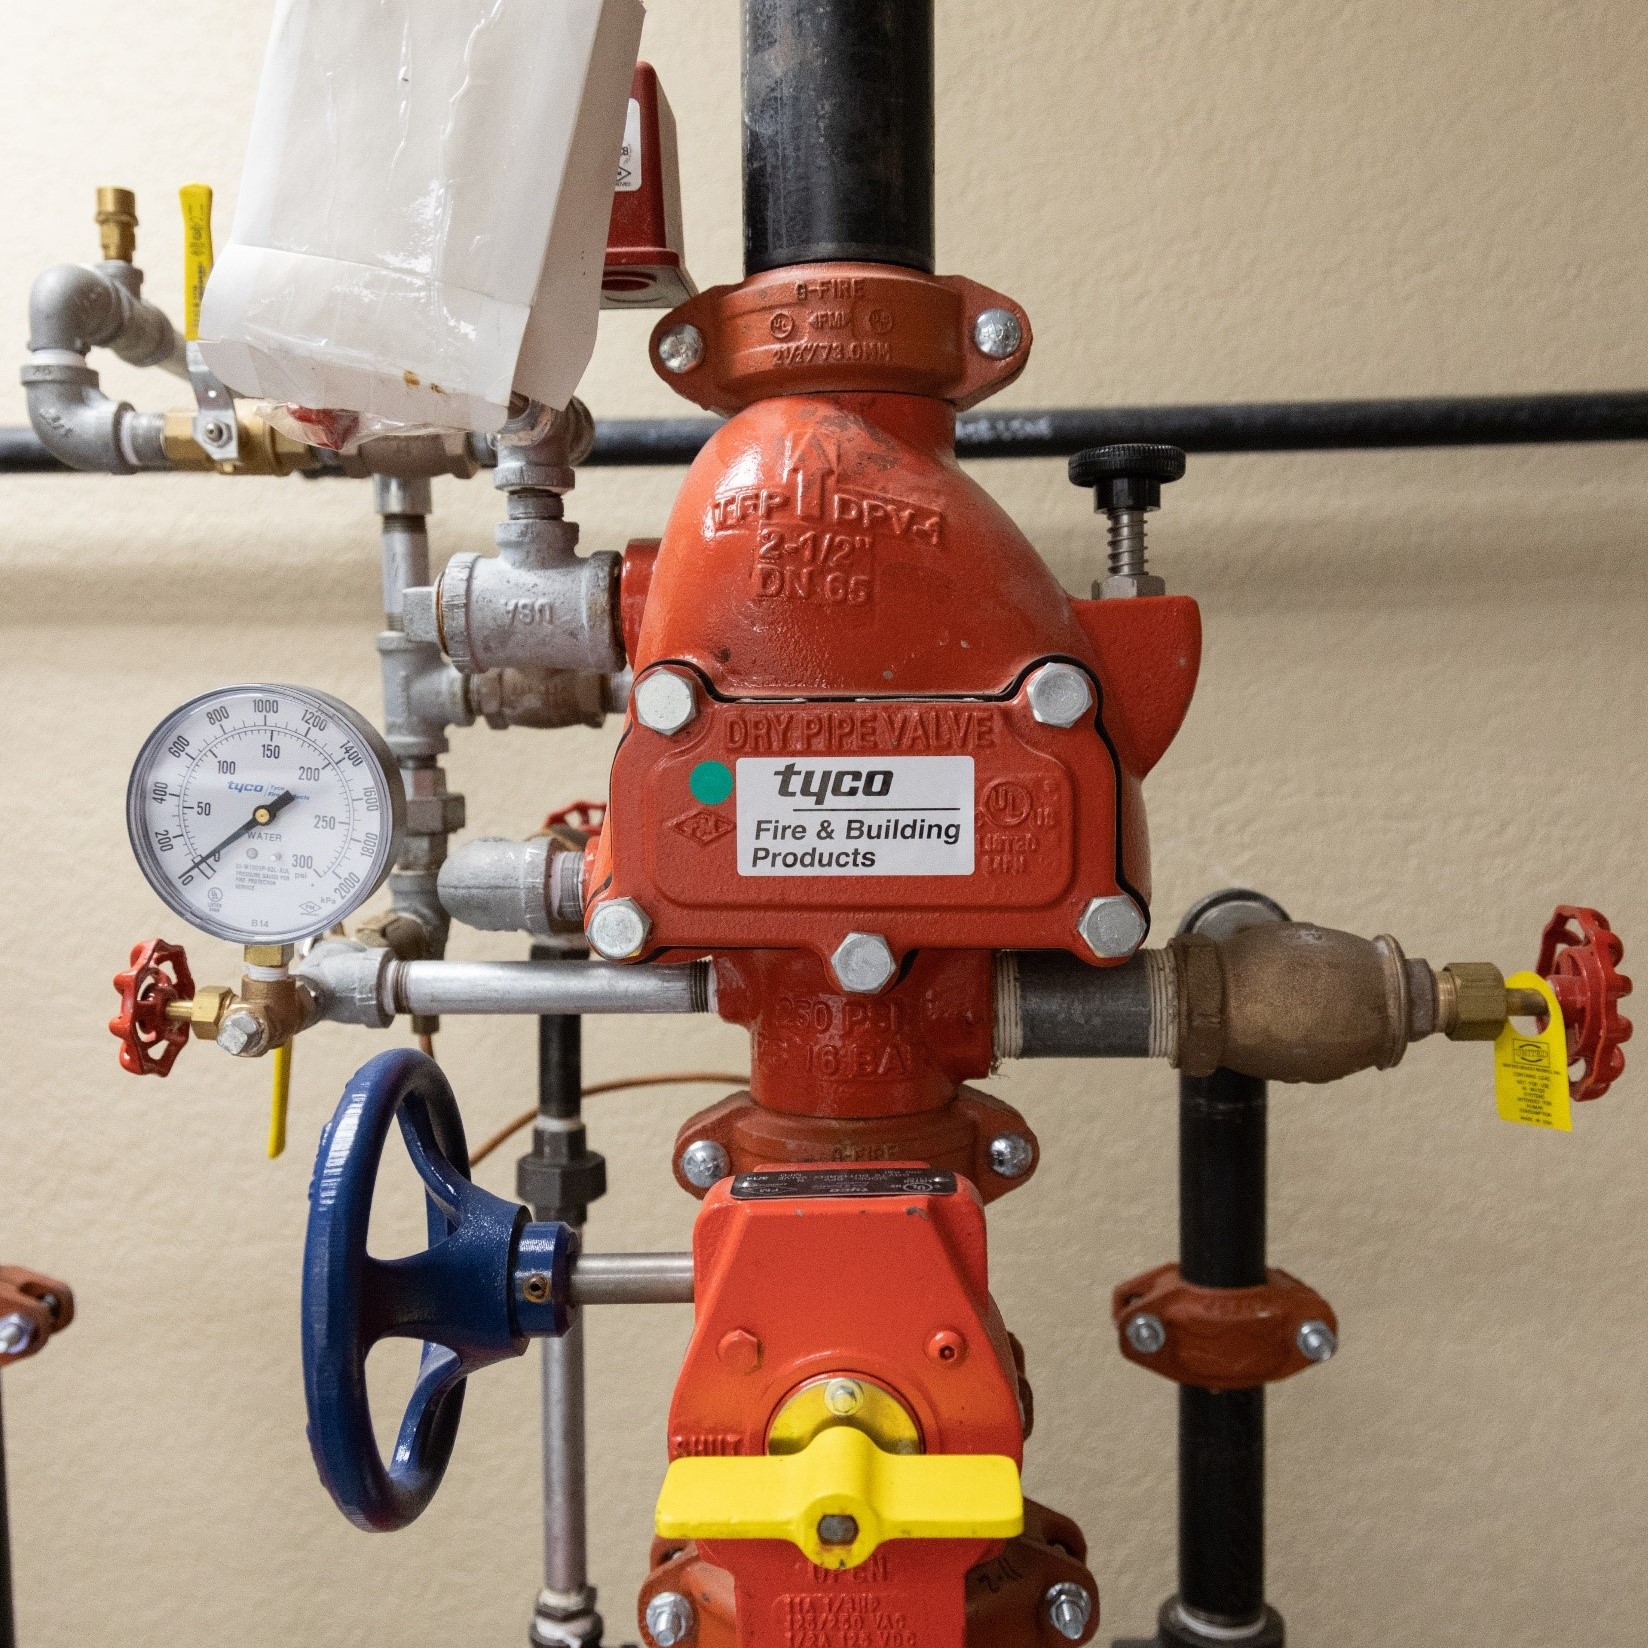  Why do Fire Protection Systems Require Check Valves?